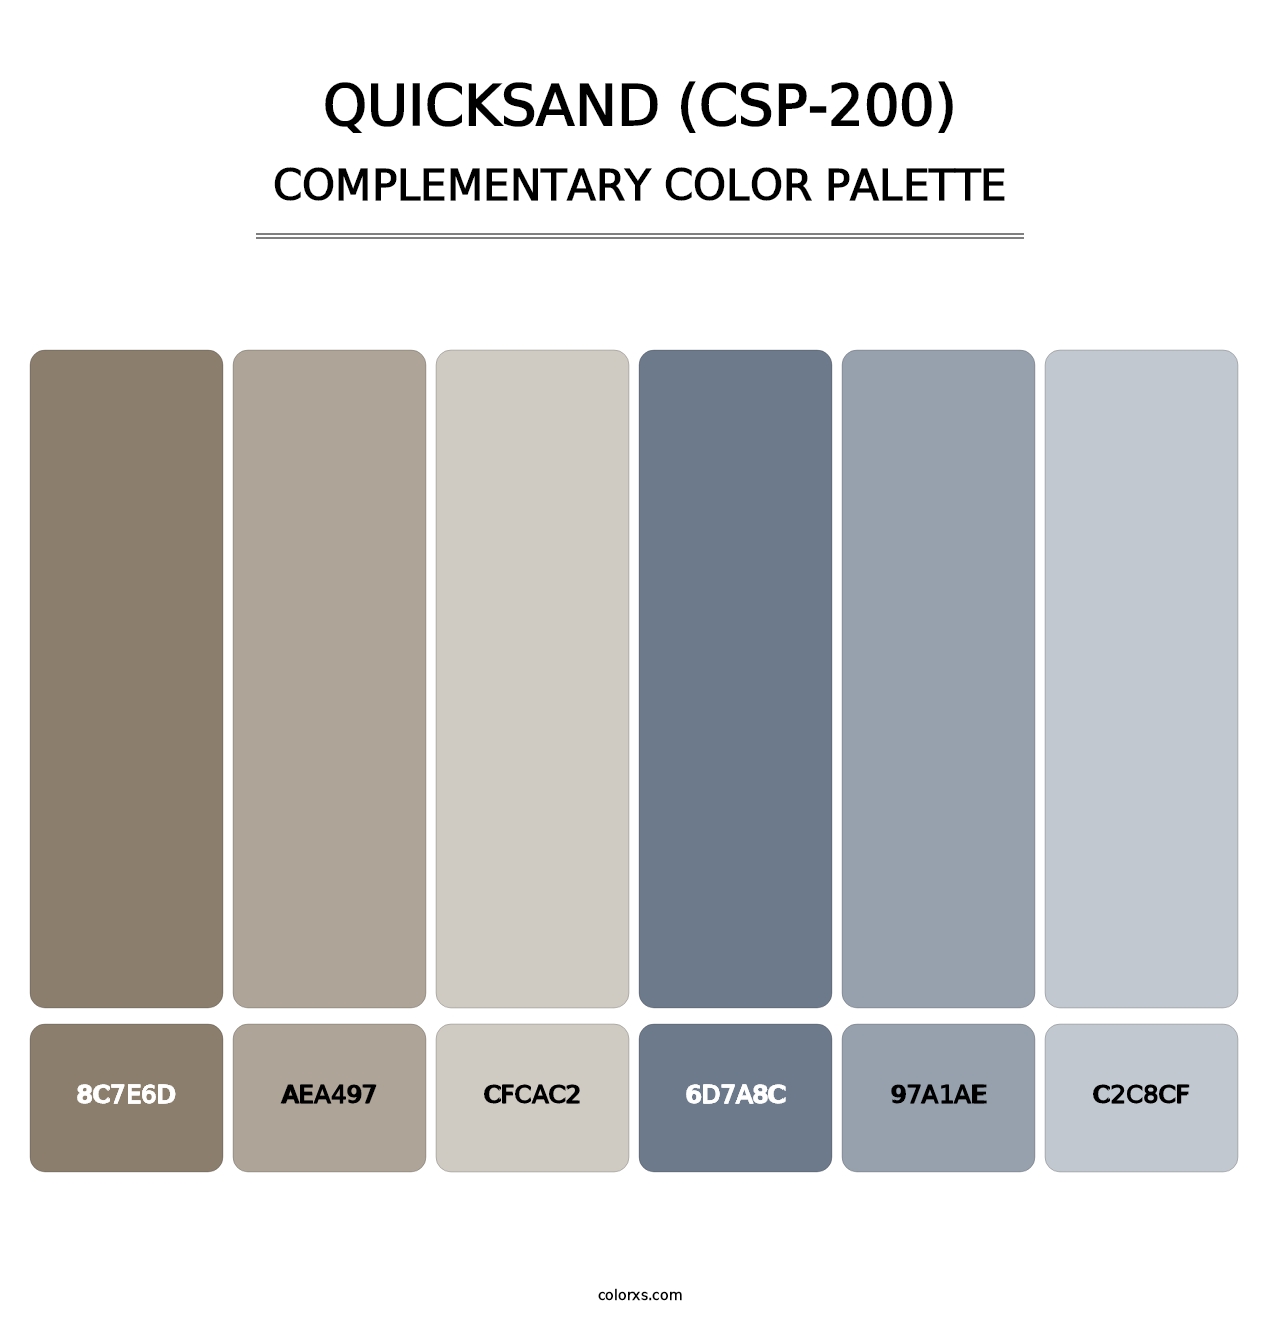 Quicksand (CSP-200) - Complementary Color Palette